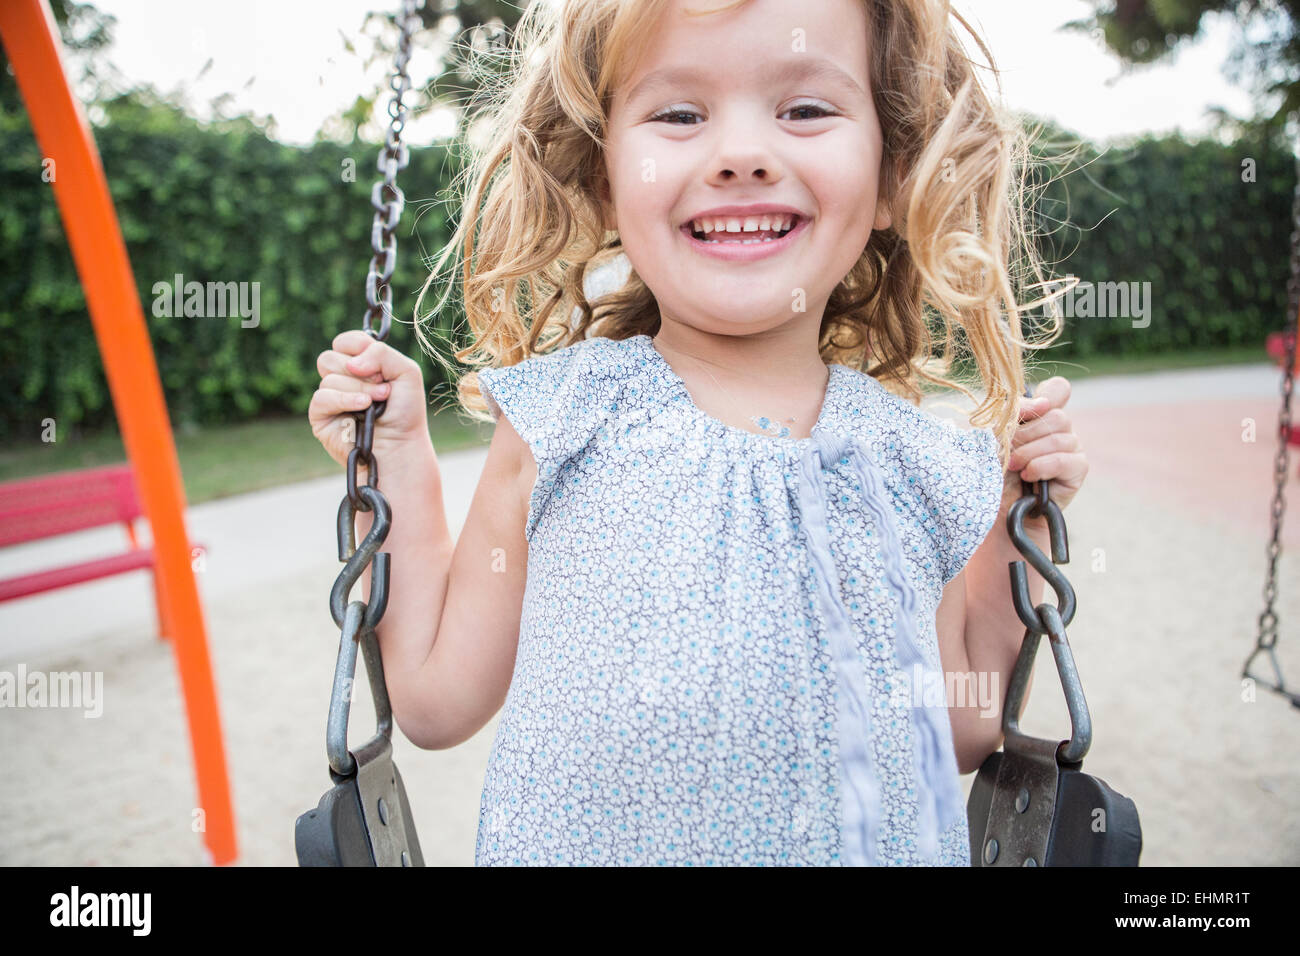 Caucasian girl playing on swing Banque D'Images